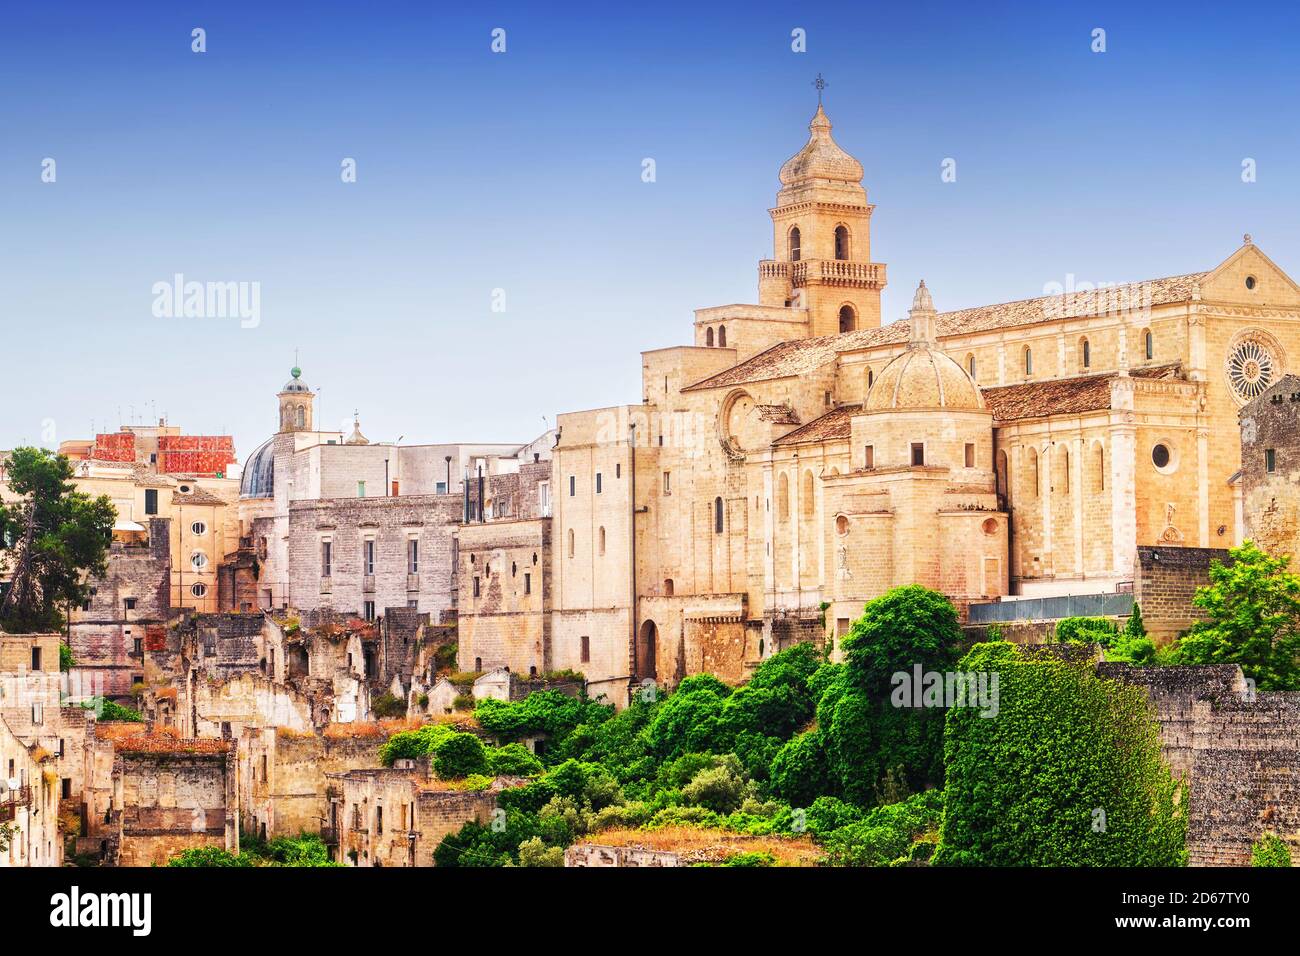 The old town of Gravina in Puglia in Southern Italy at sunset Stock Photo